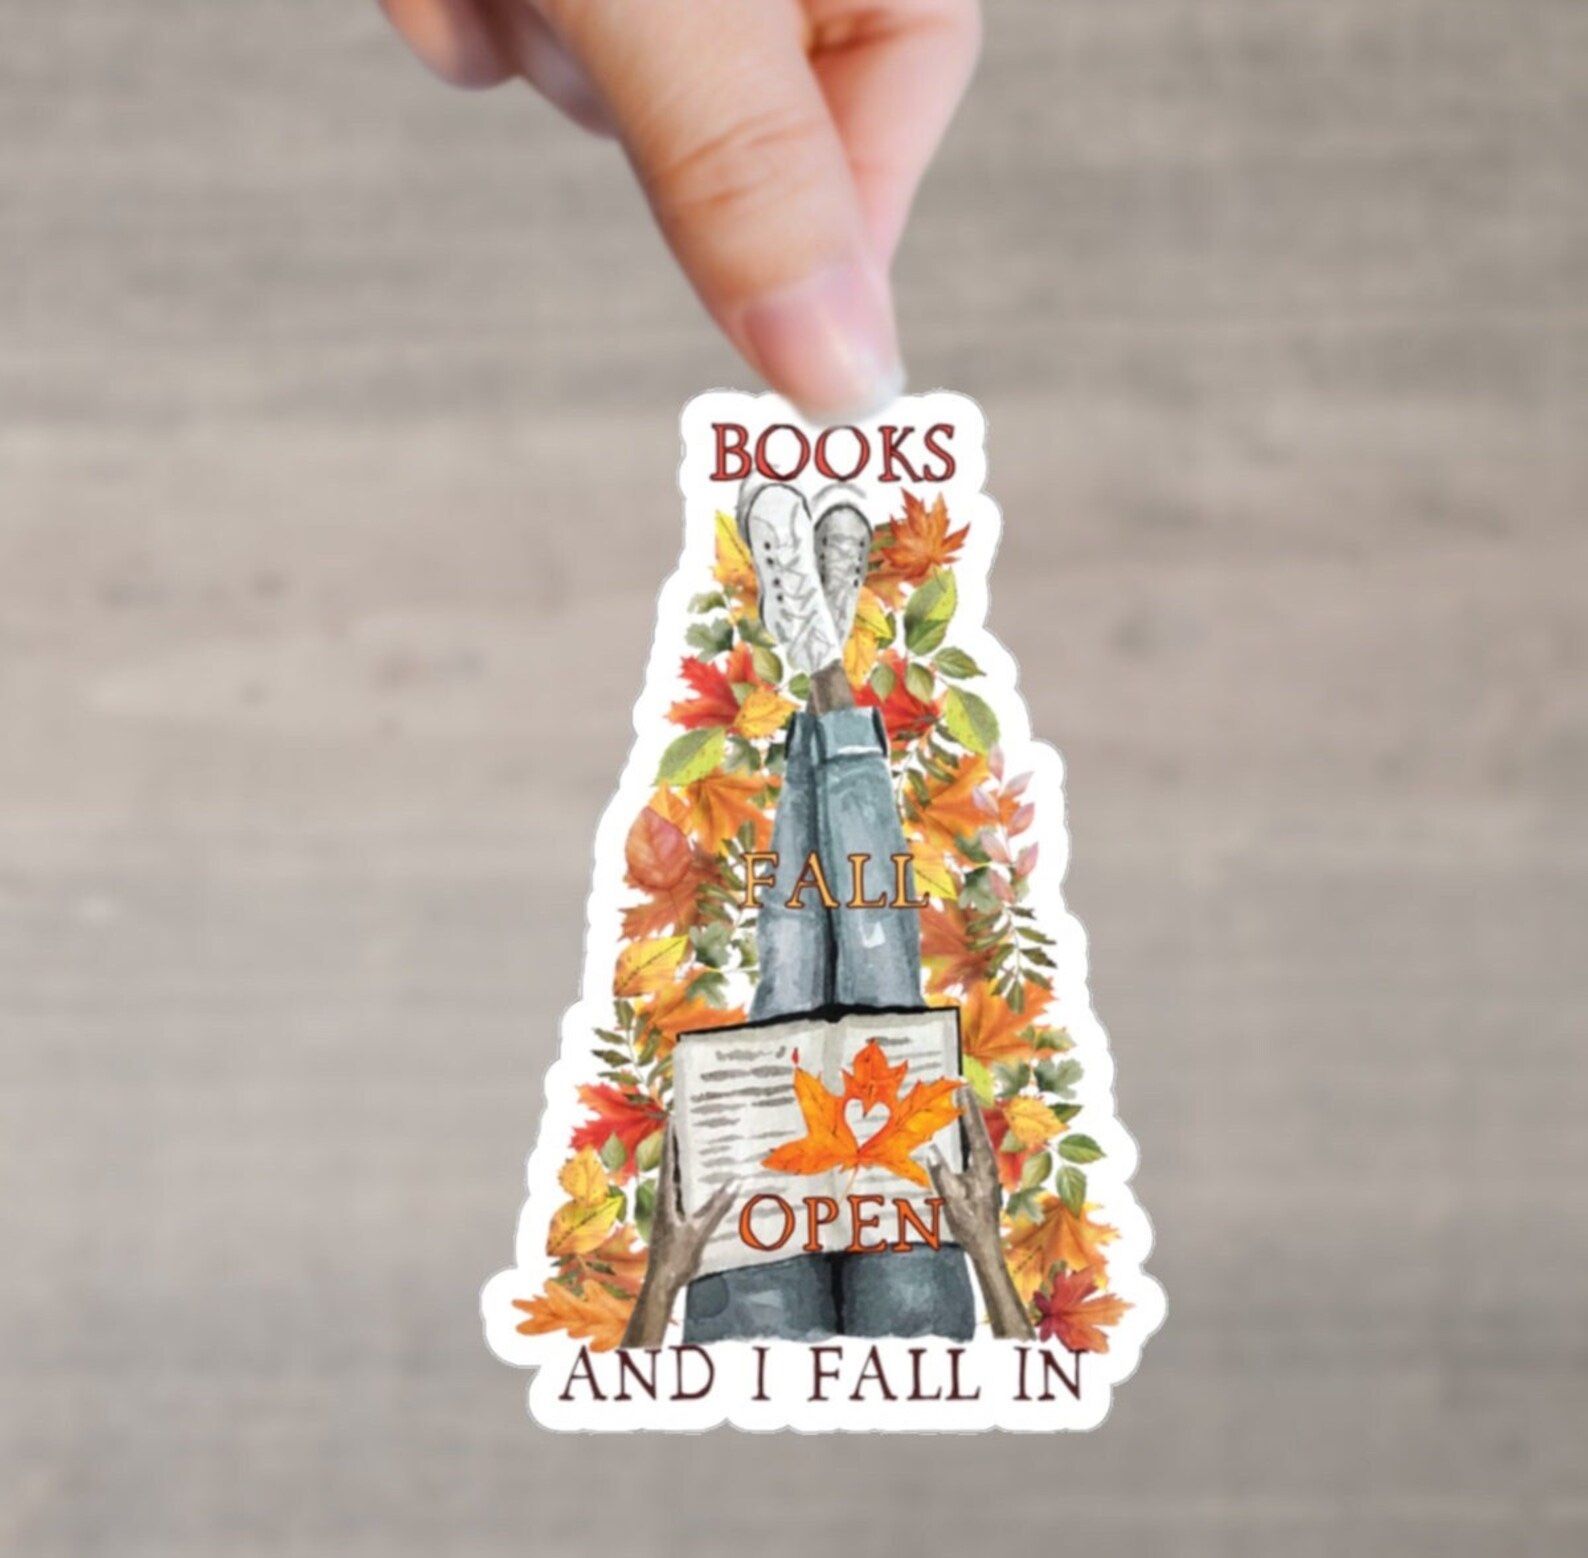 sticker of person reading book that says books fall open and i fall in